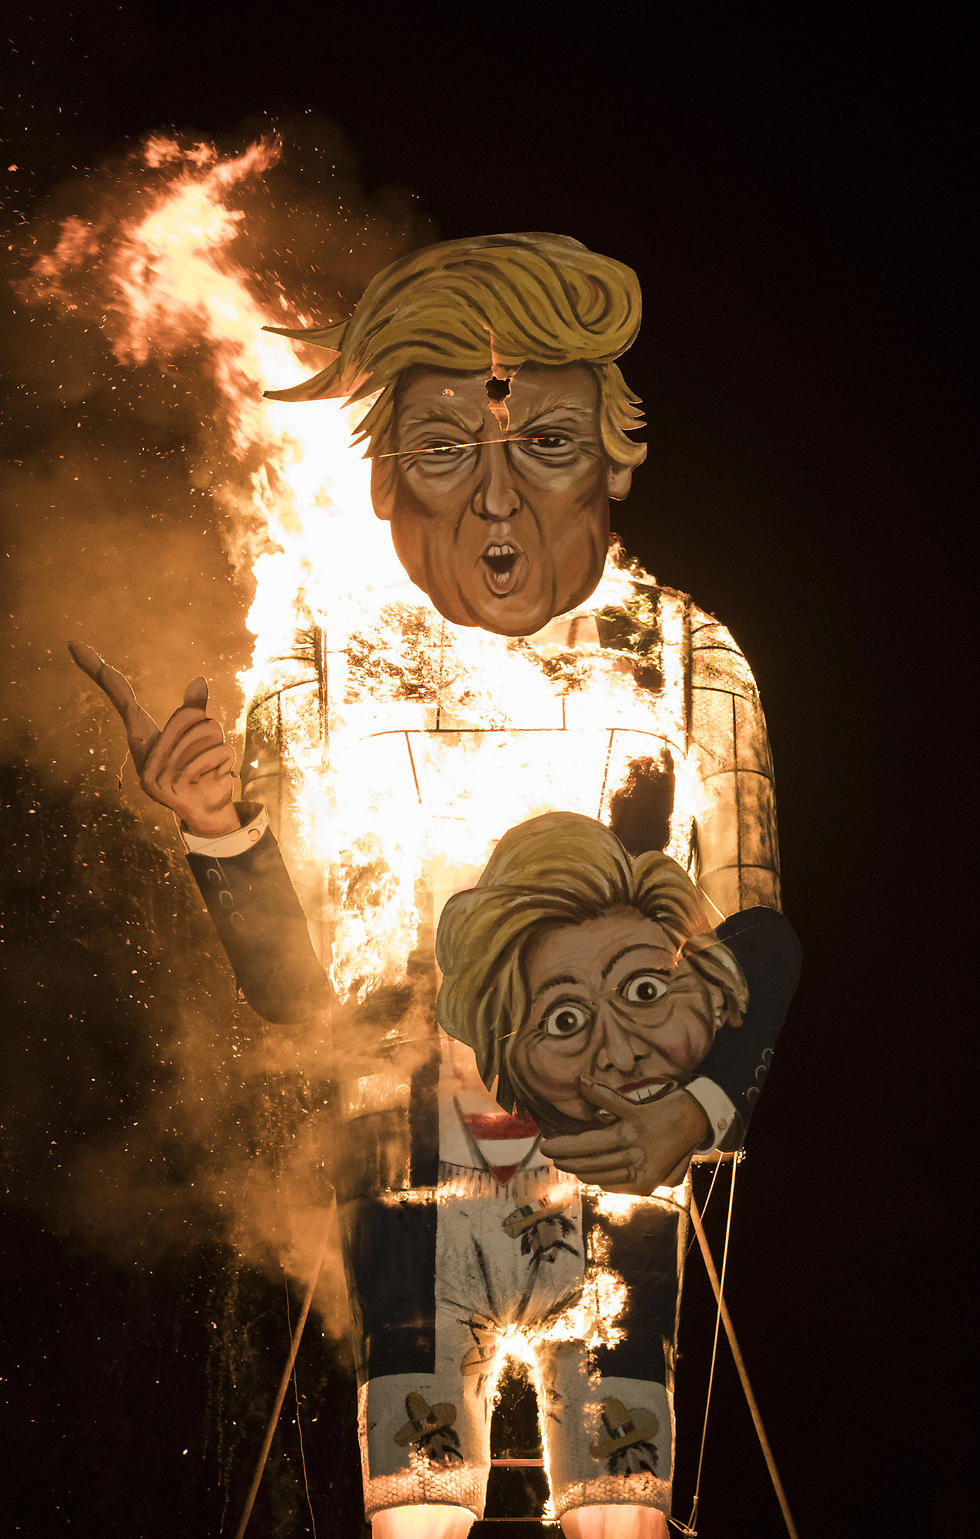 Donald Trump effigy in Britain (Photo: Gettyimages)